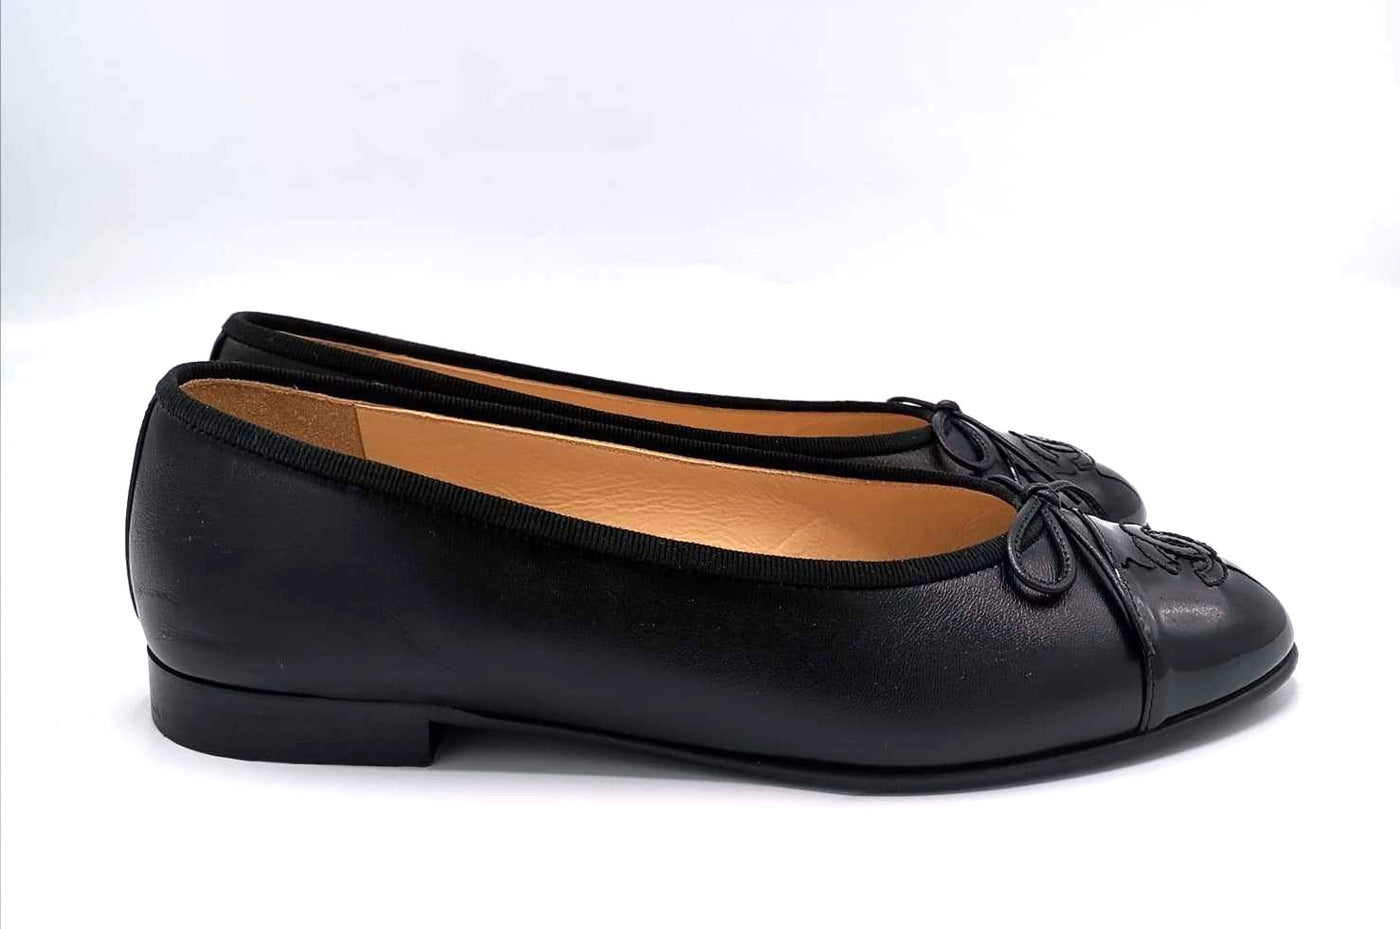 CHANEL black ballet flats size 37 with orignal box and dust bags RRP £610